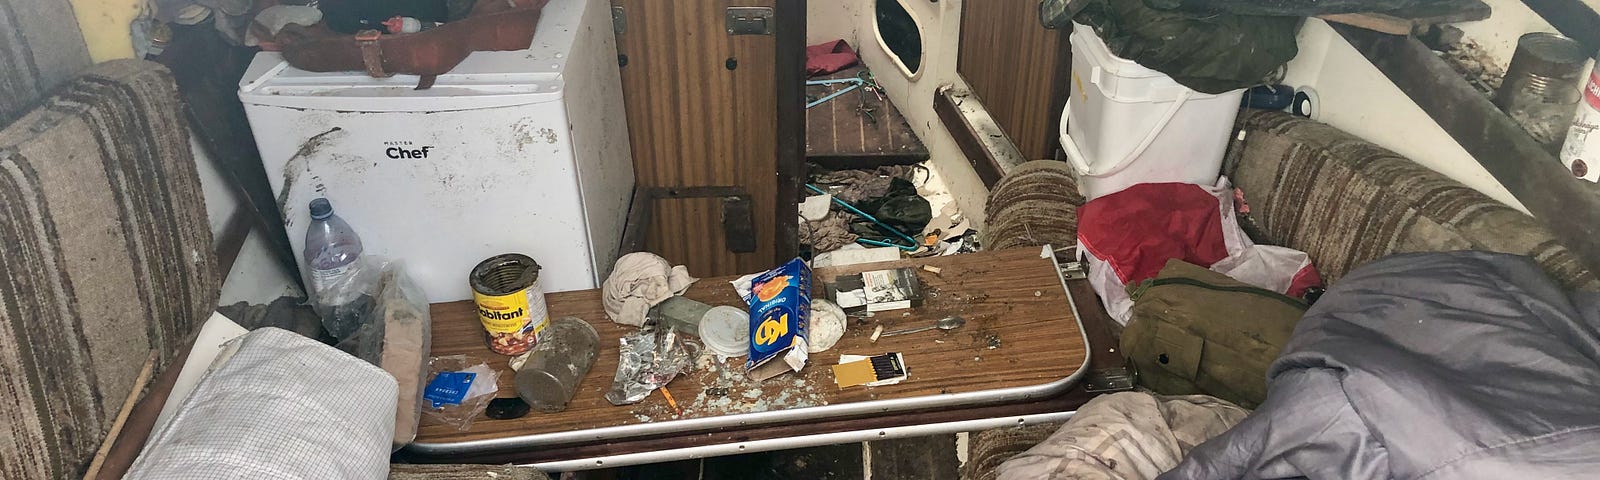 A very untidy scene. The camera looks down into a boat. A small table is covered in debris, a fridge is in the corner and bedding litters one side.